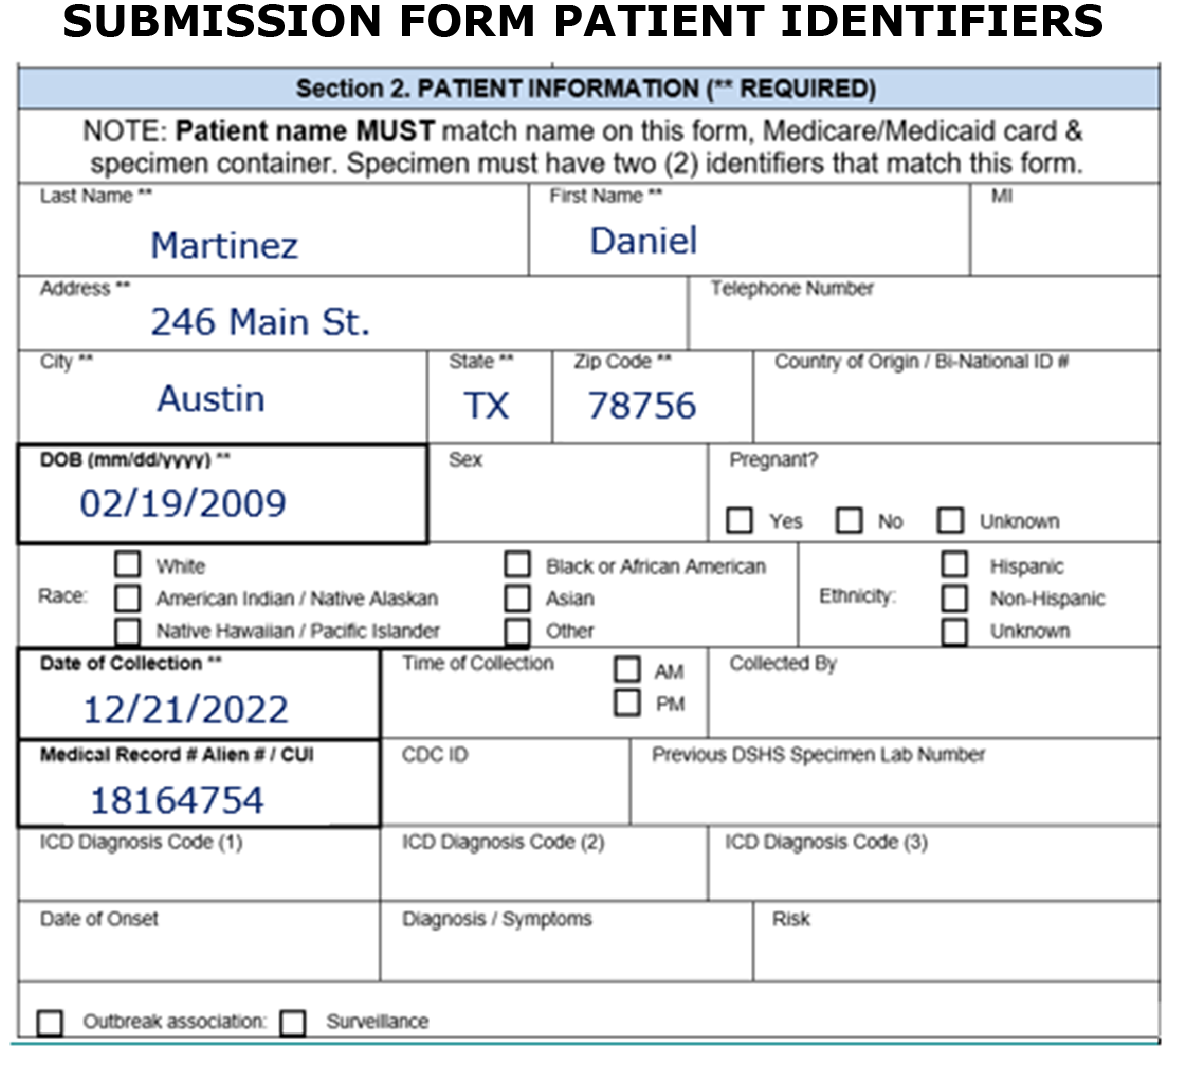 "Screen Shot of the Submission Form Patient Identifiers"